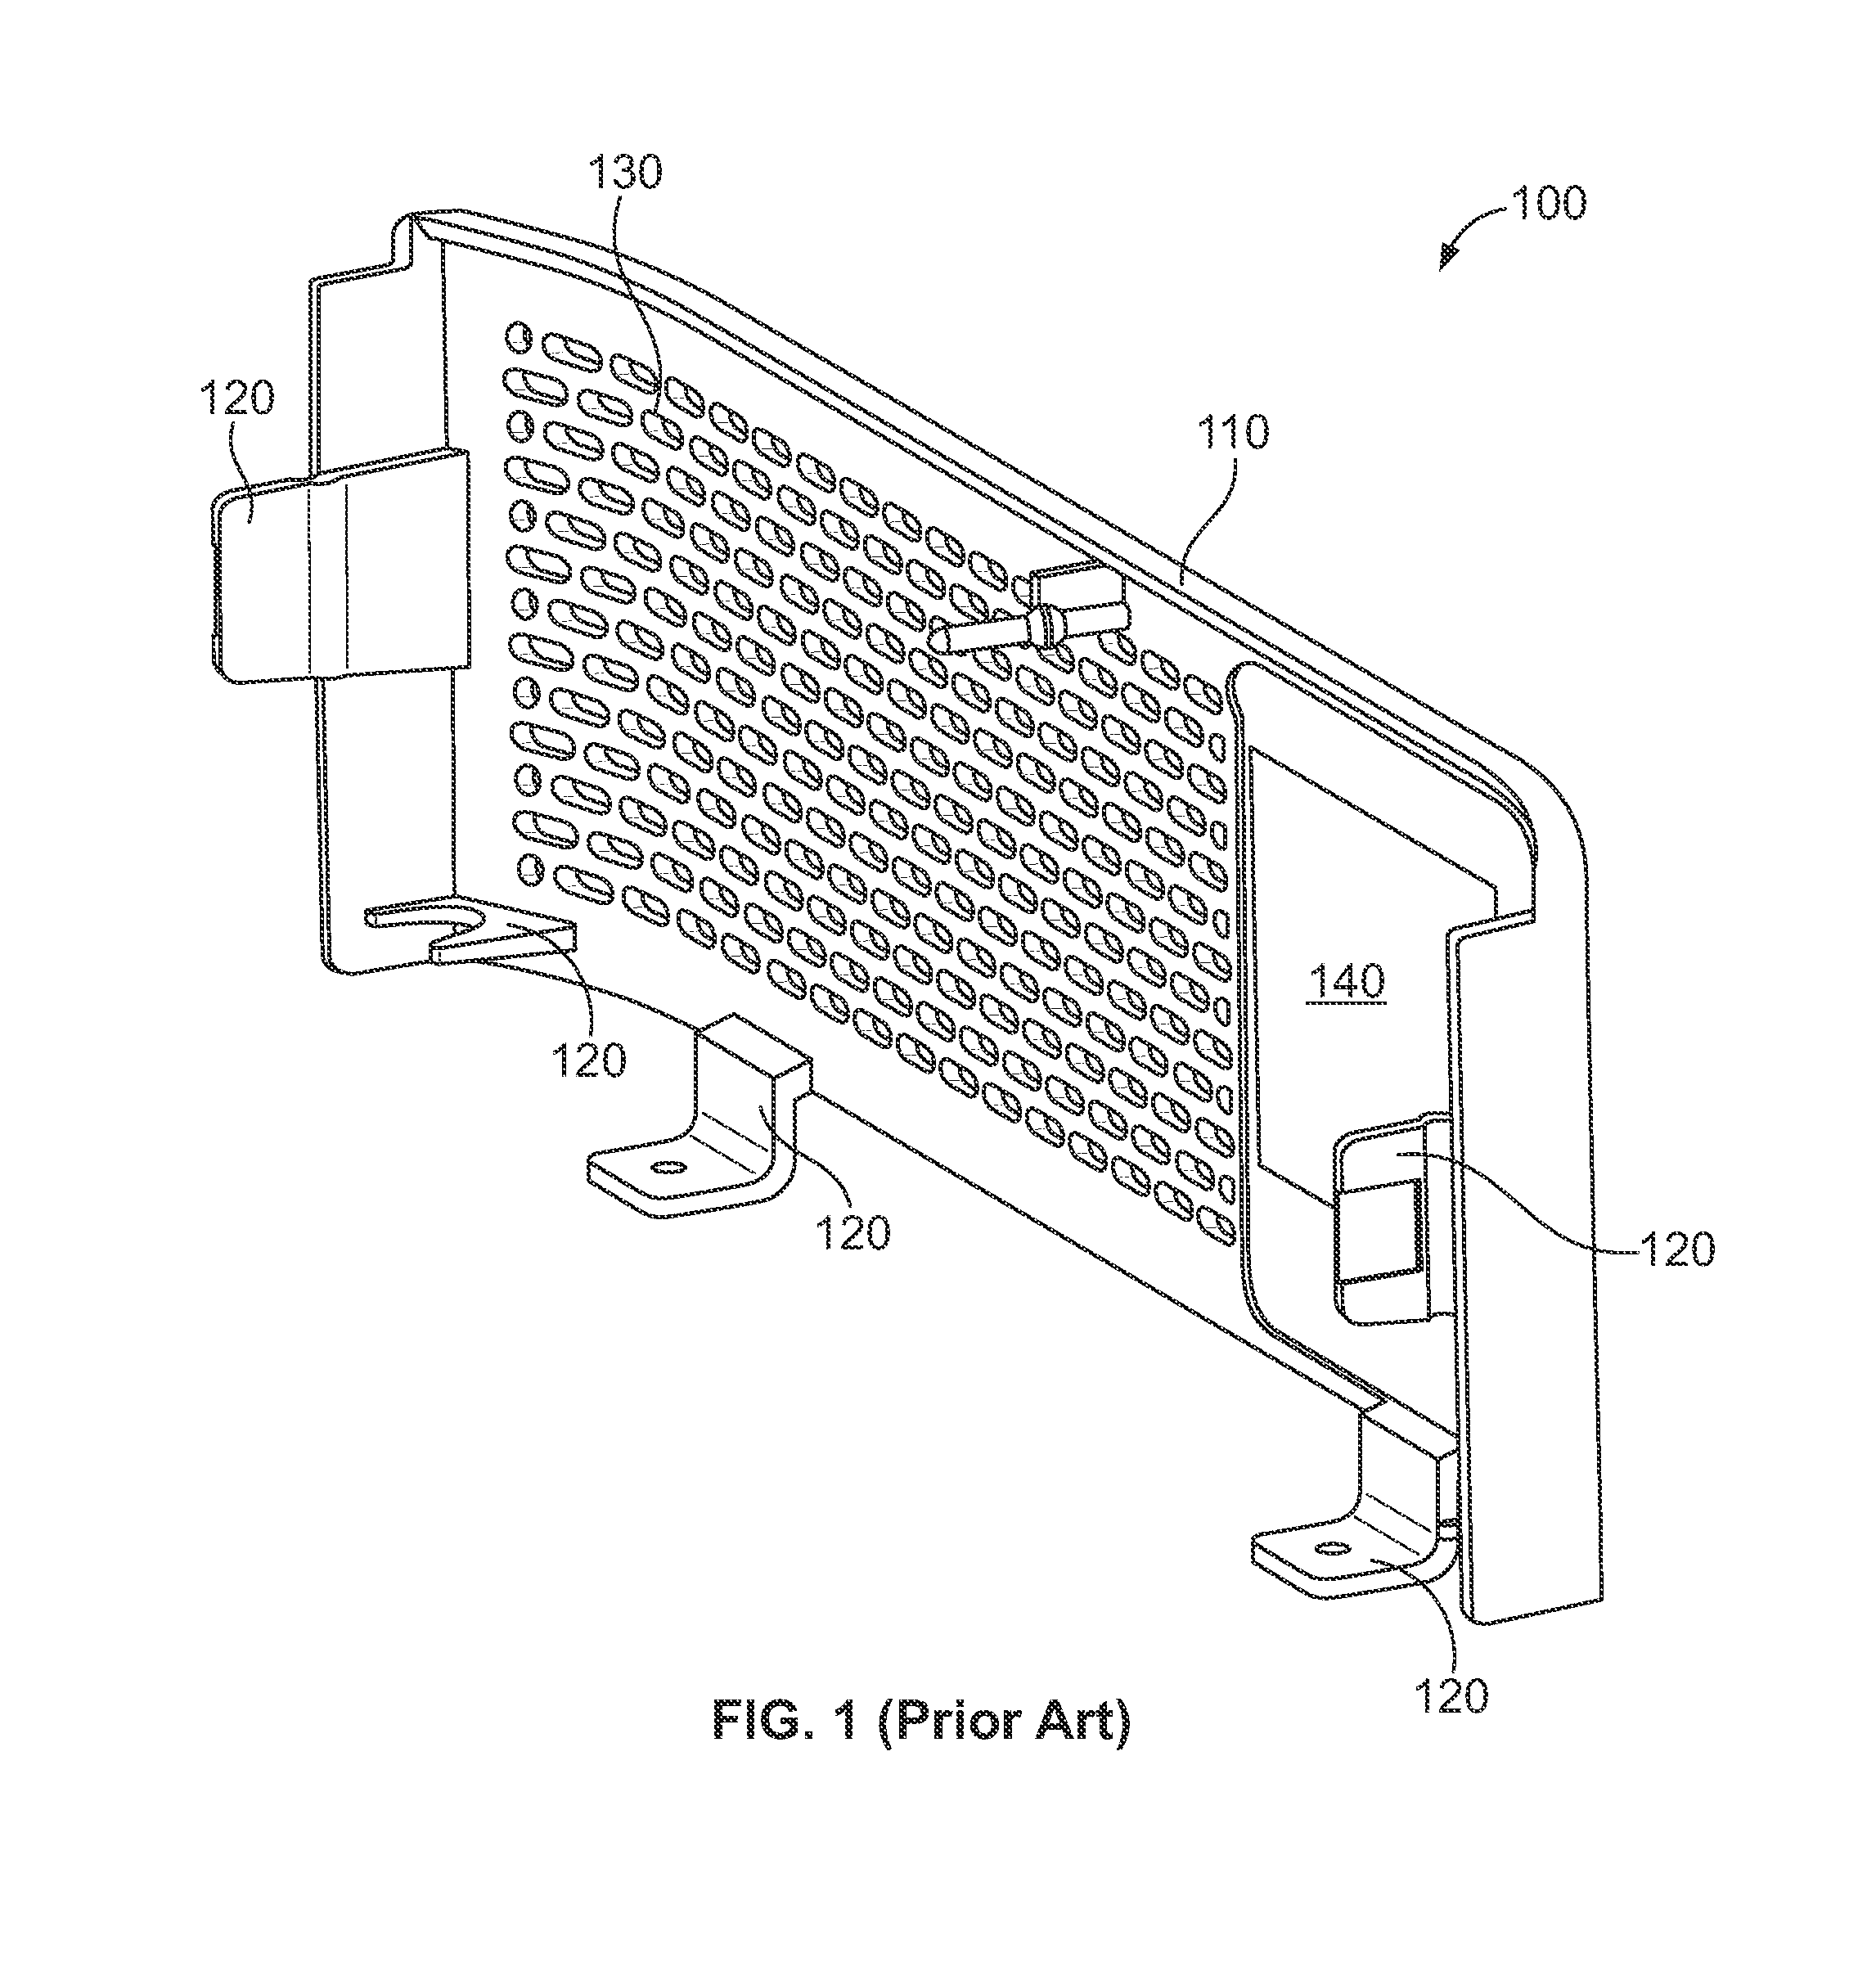 Noise-Reducing Air Inlet Grille for an Appliance